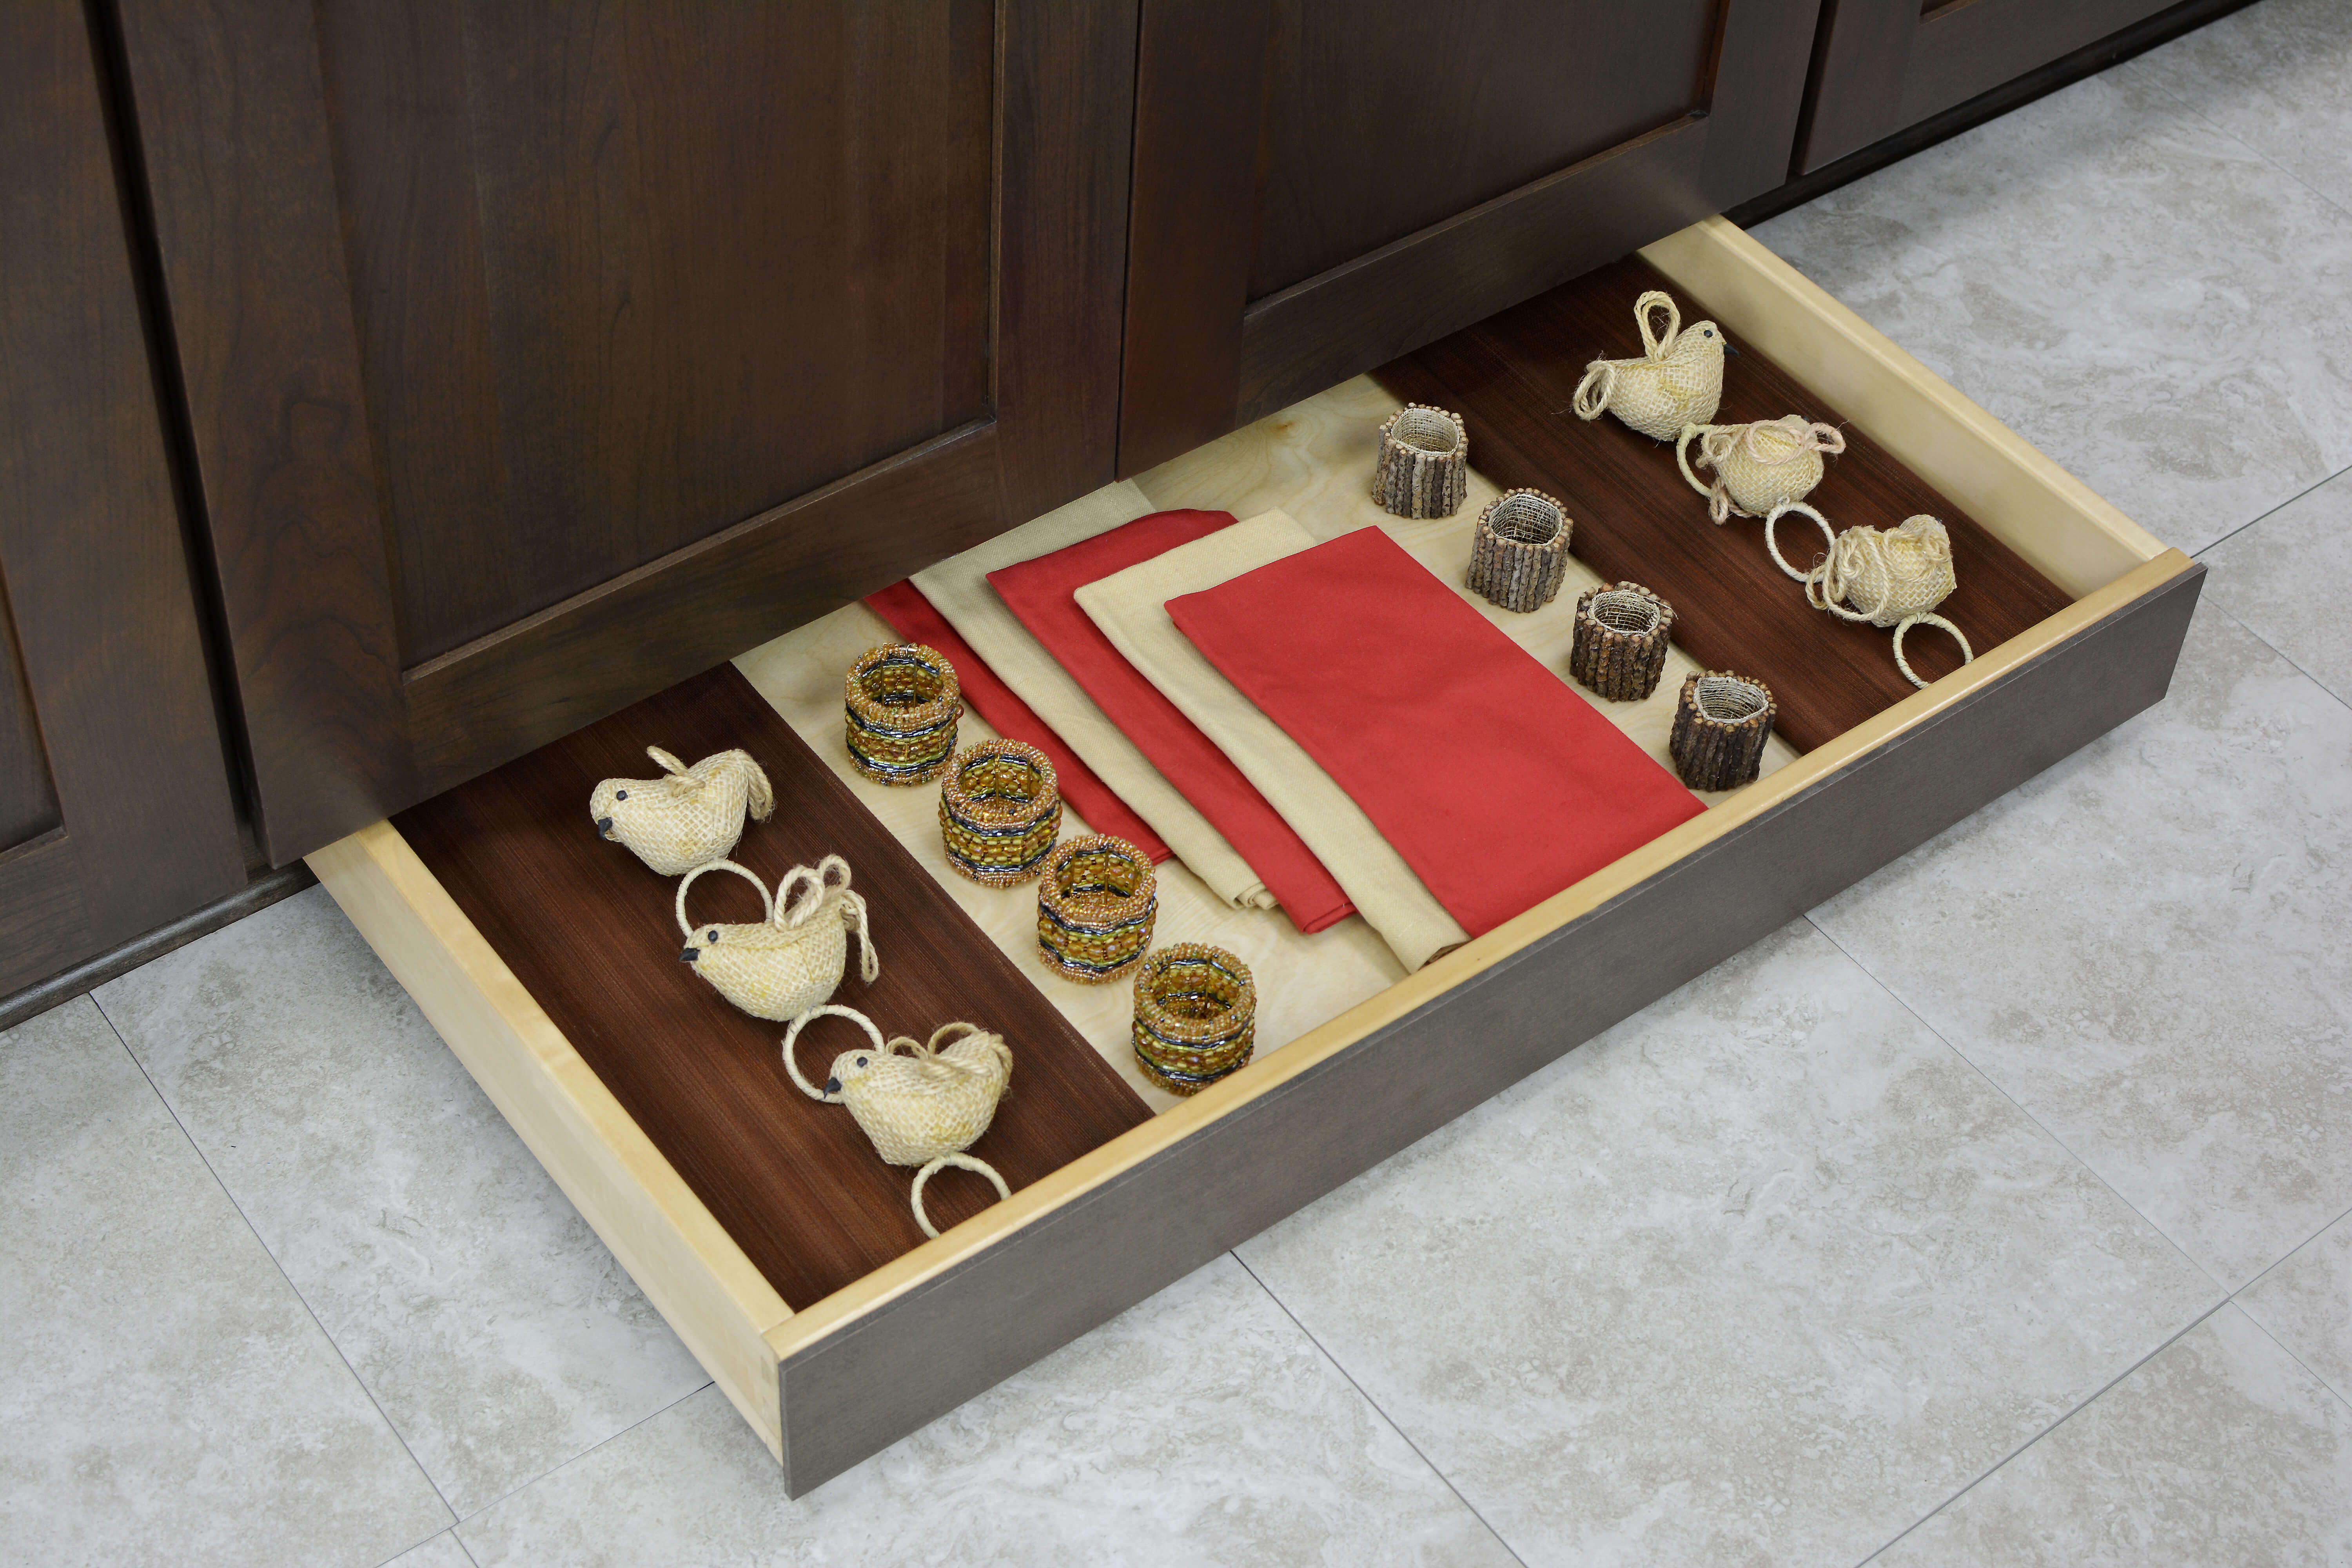 A hidden toe kick drawer with extra storage for seasonal napkins and tableware.